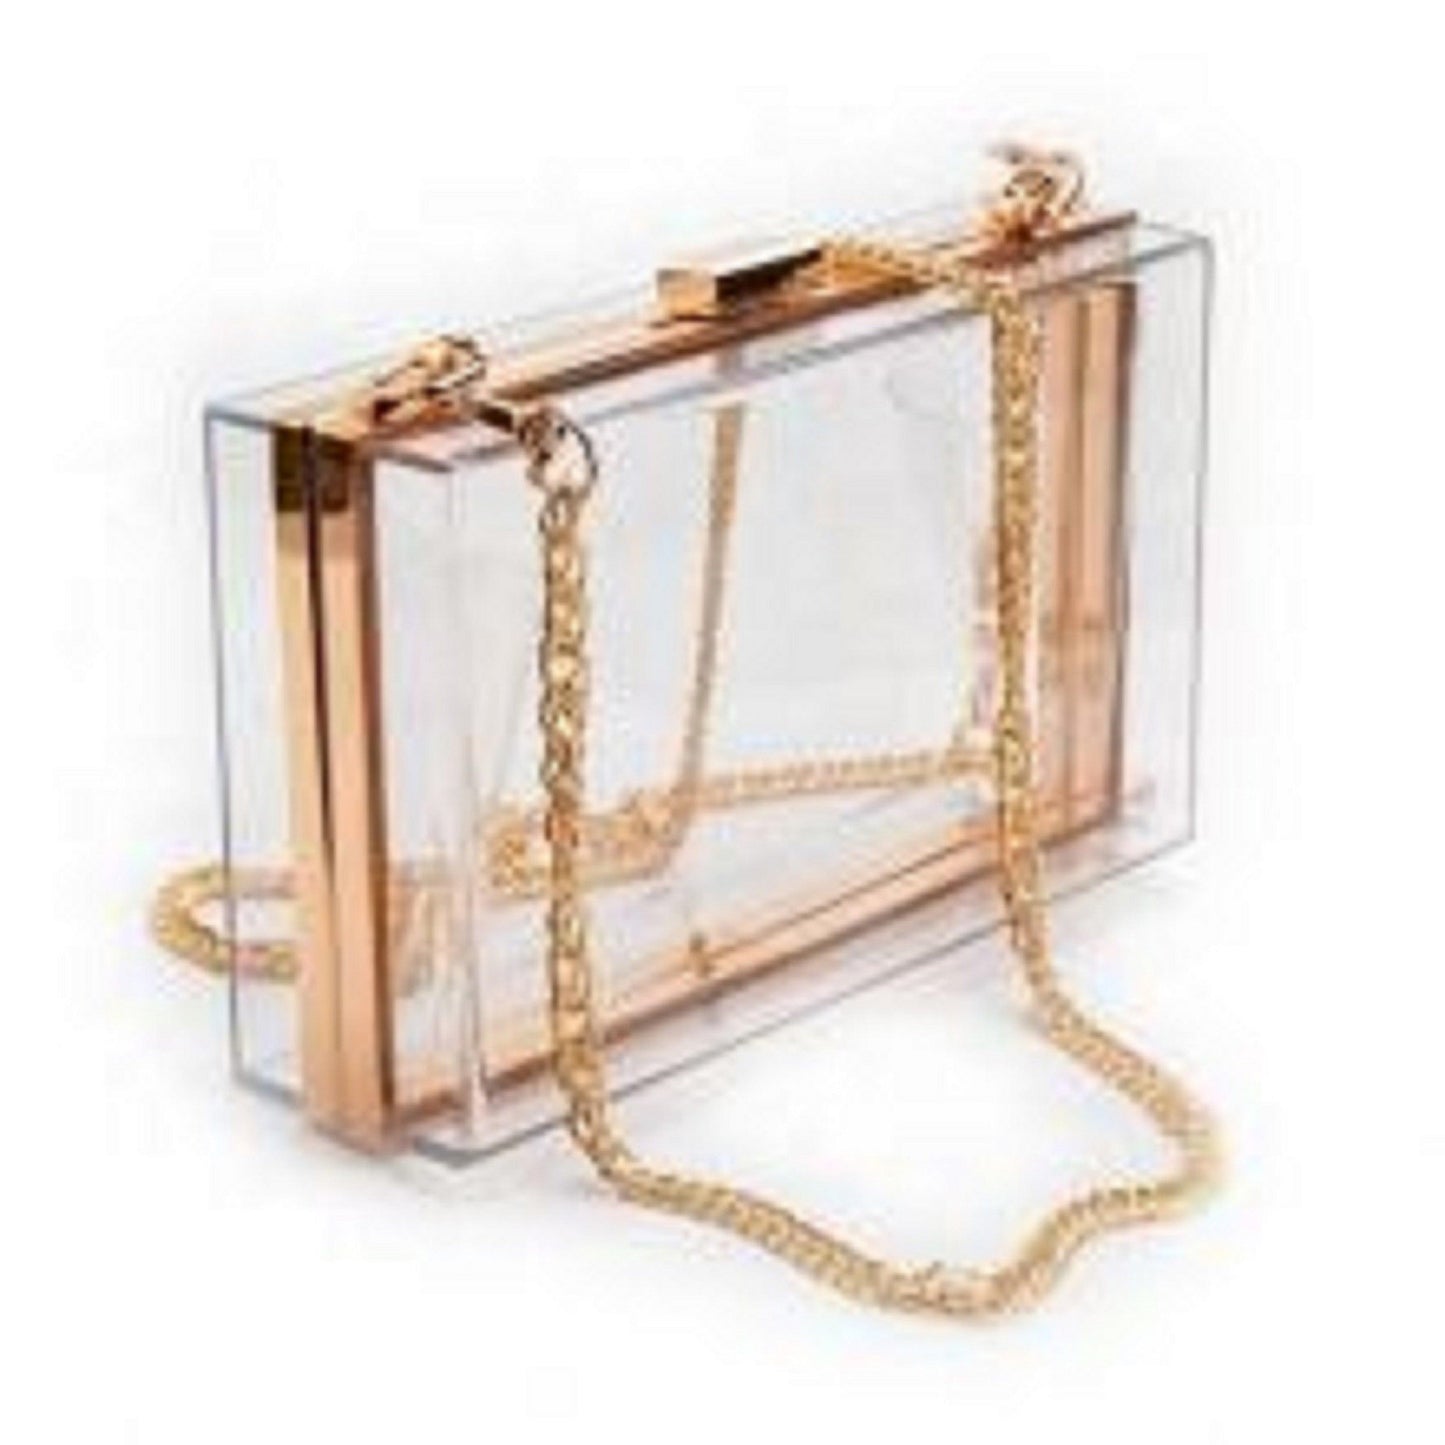 Gold Trim Clear Clutch - Twin Chronicles 